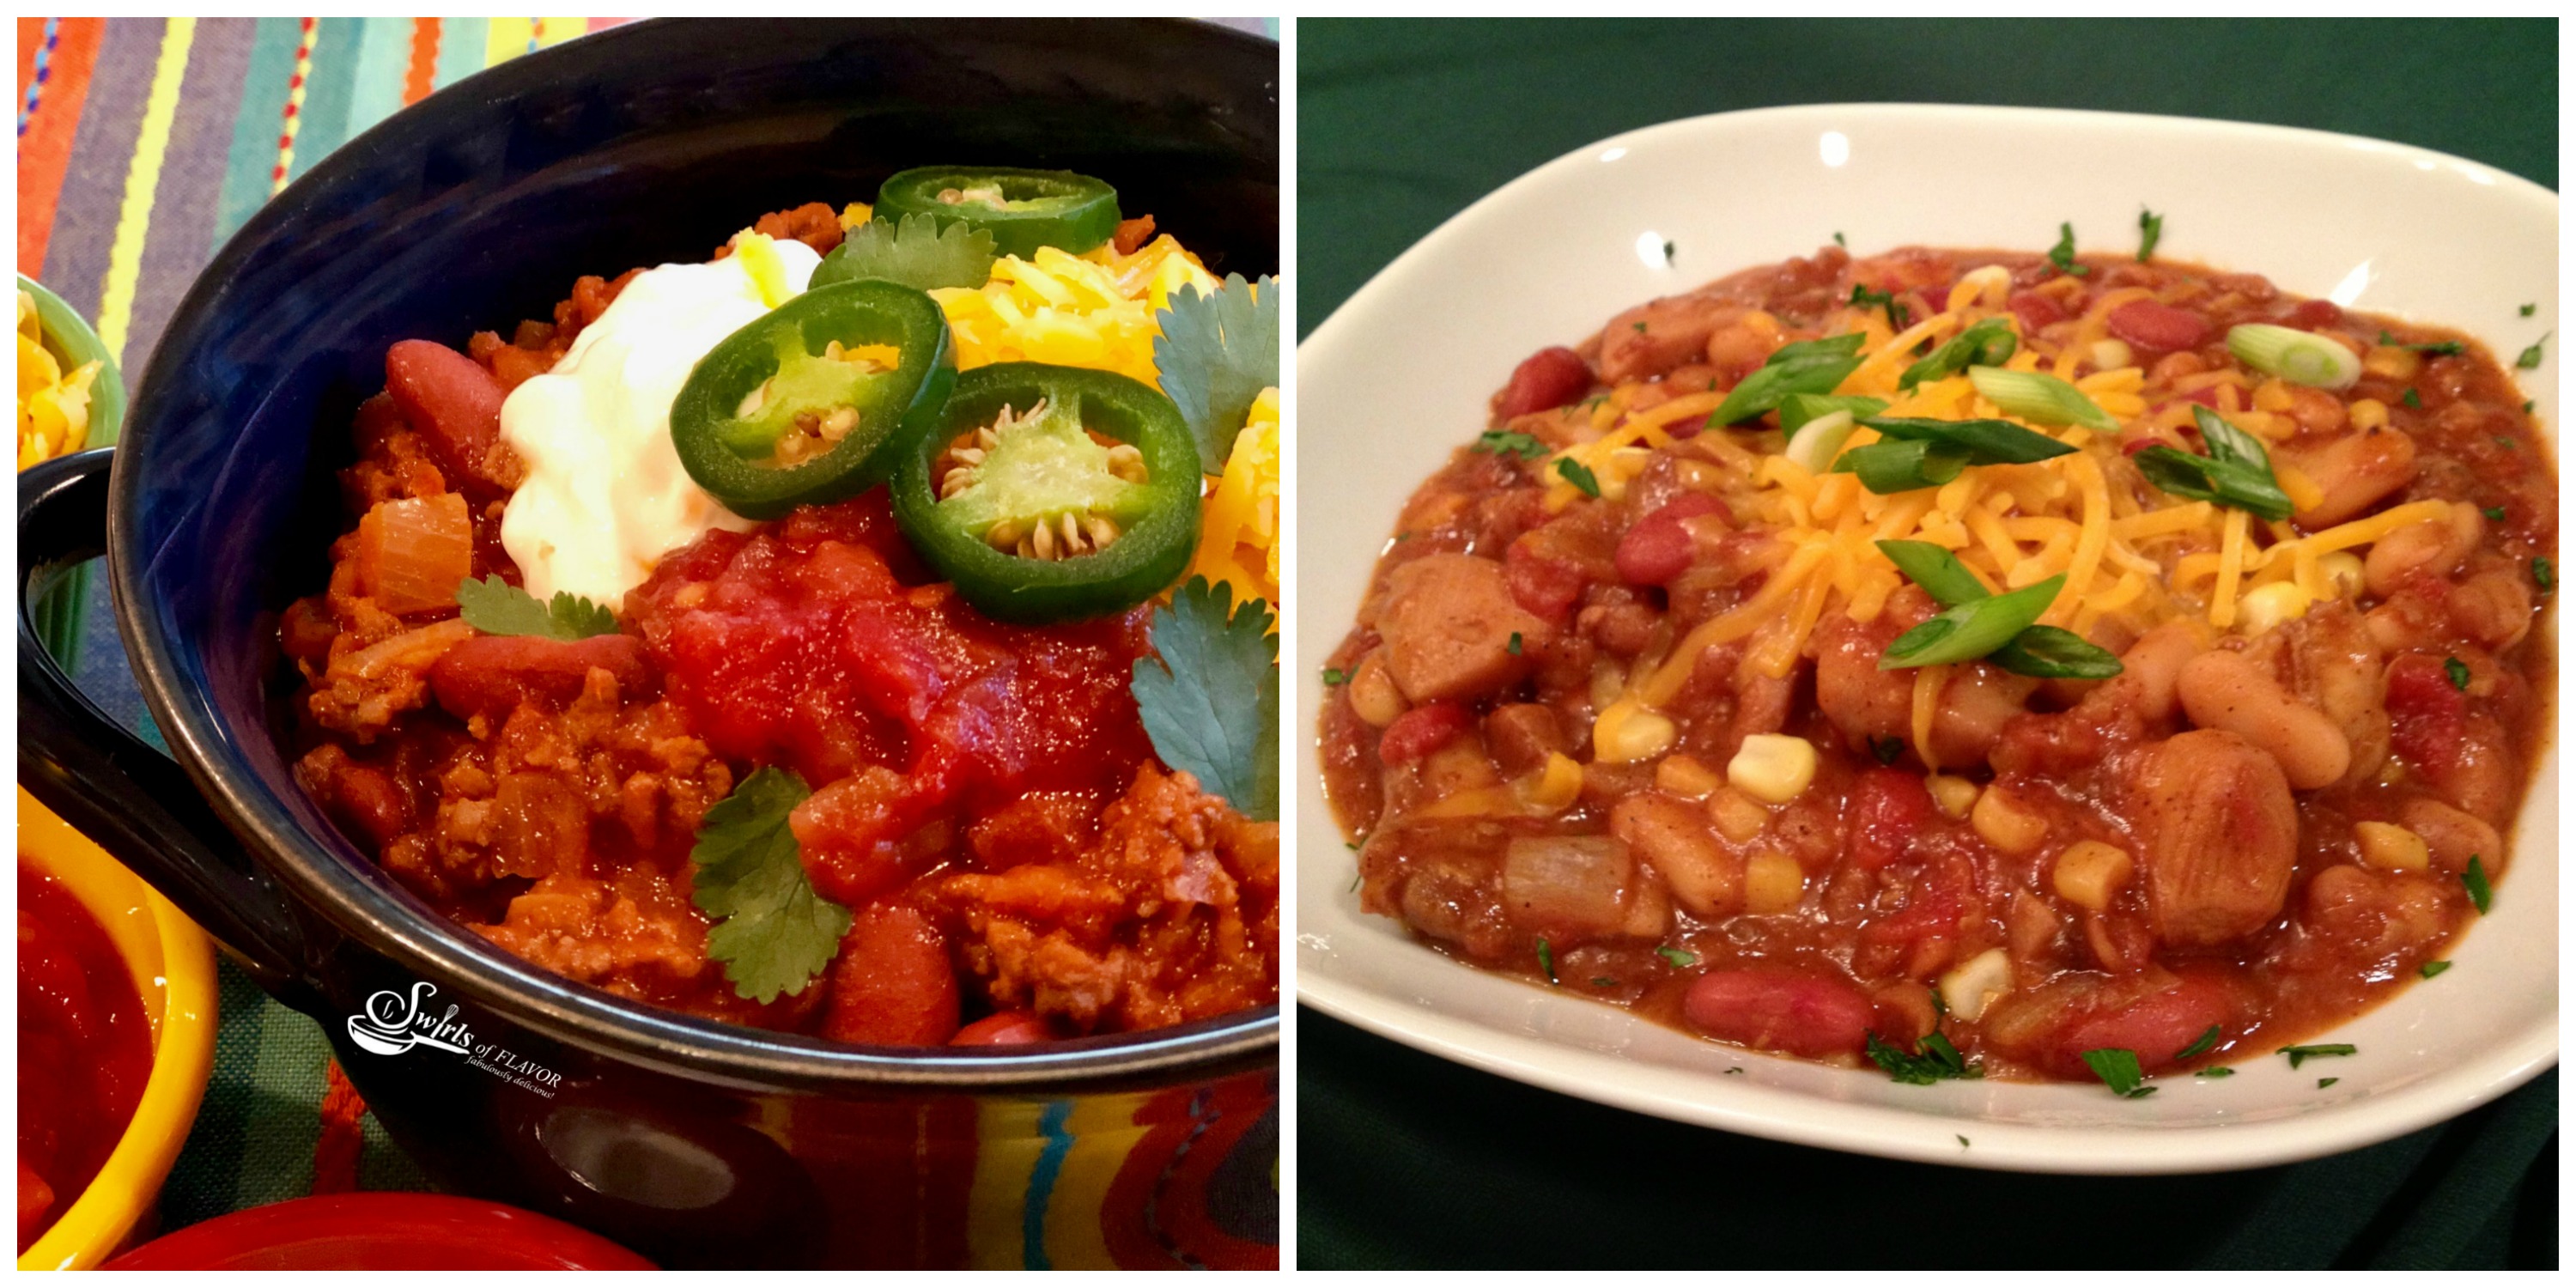 Best Ever Chili and Barbecue Chili